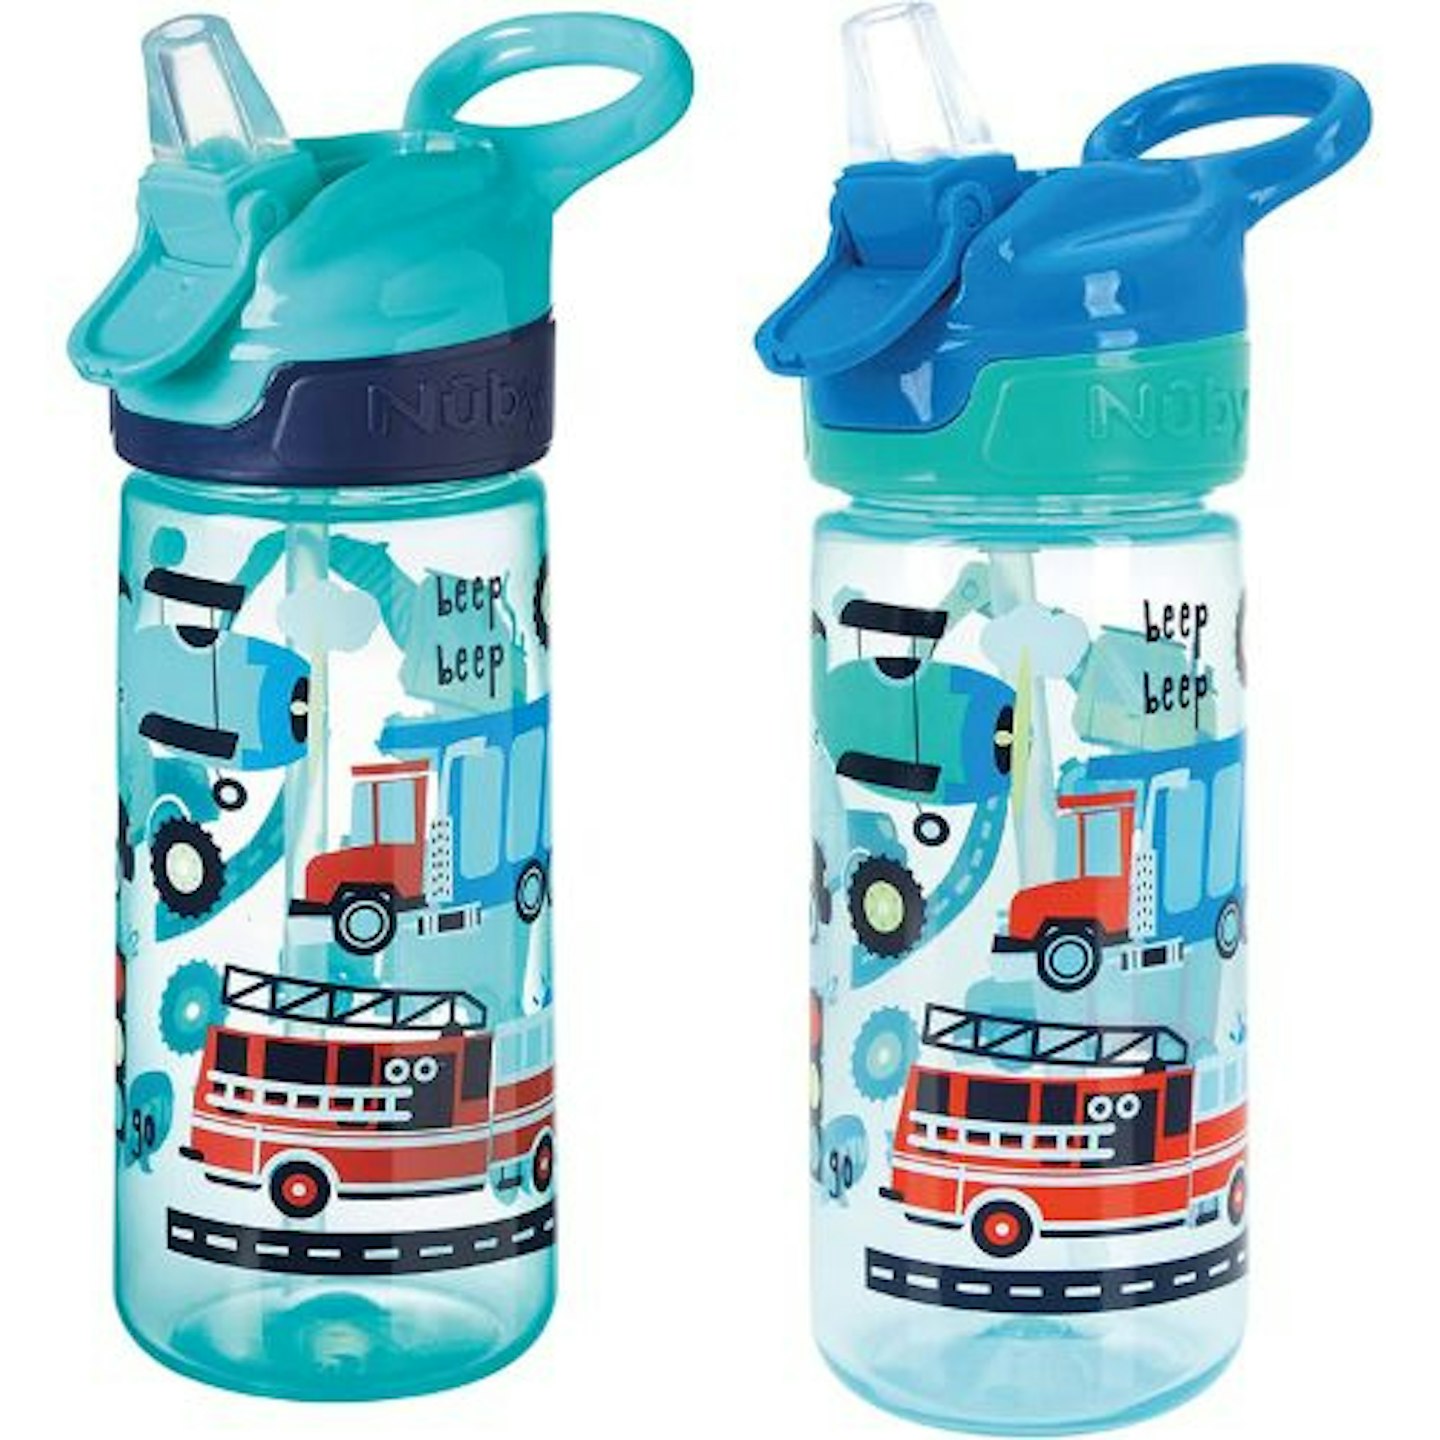 Buy Water Bottle For Toddler No Straw online